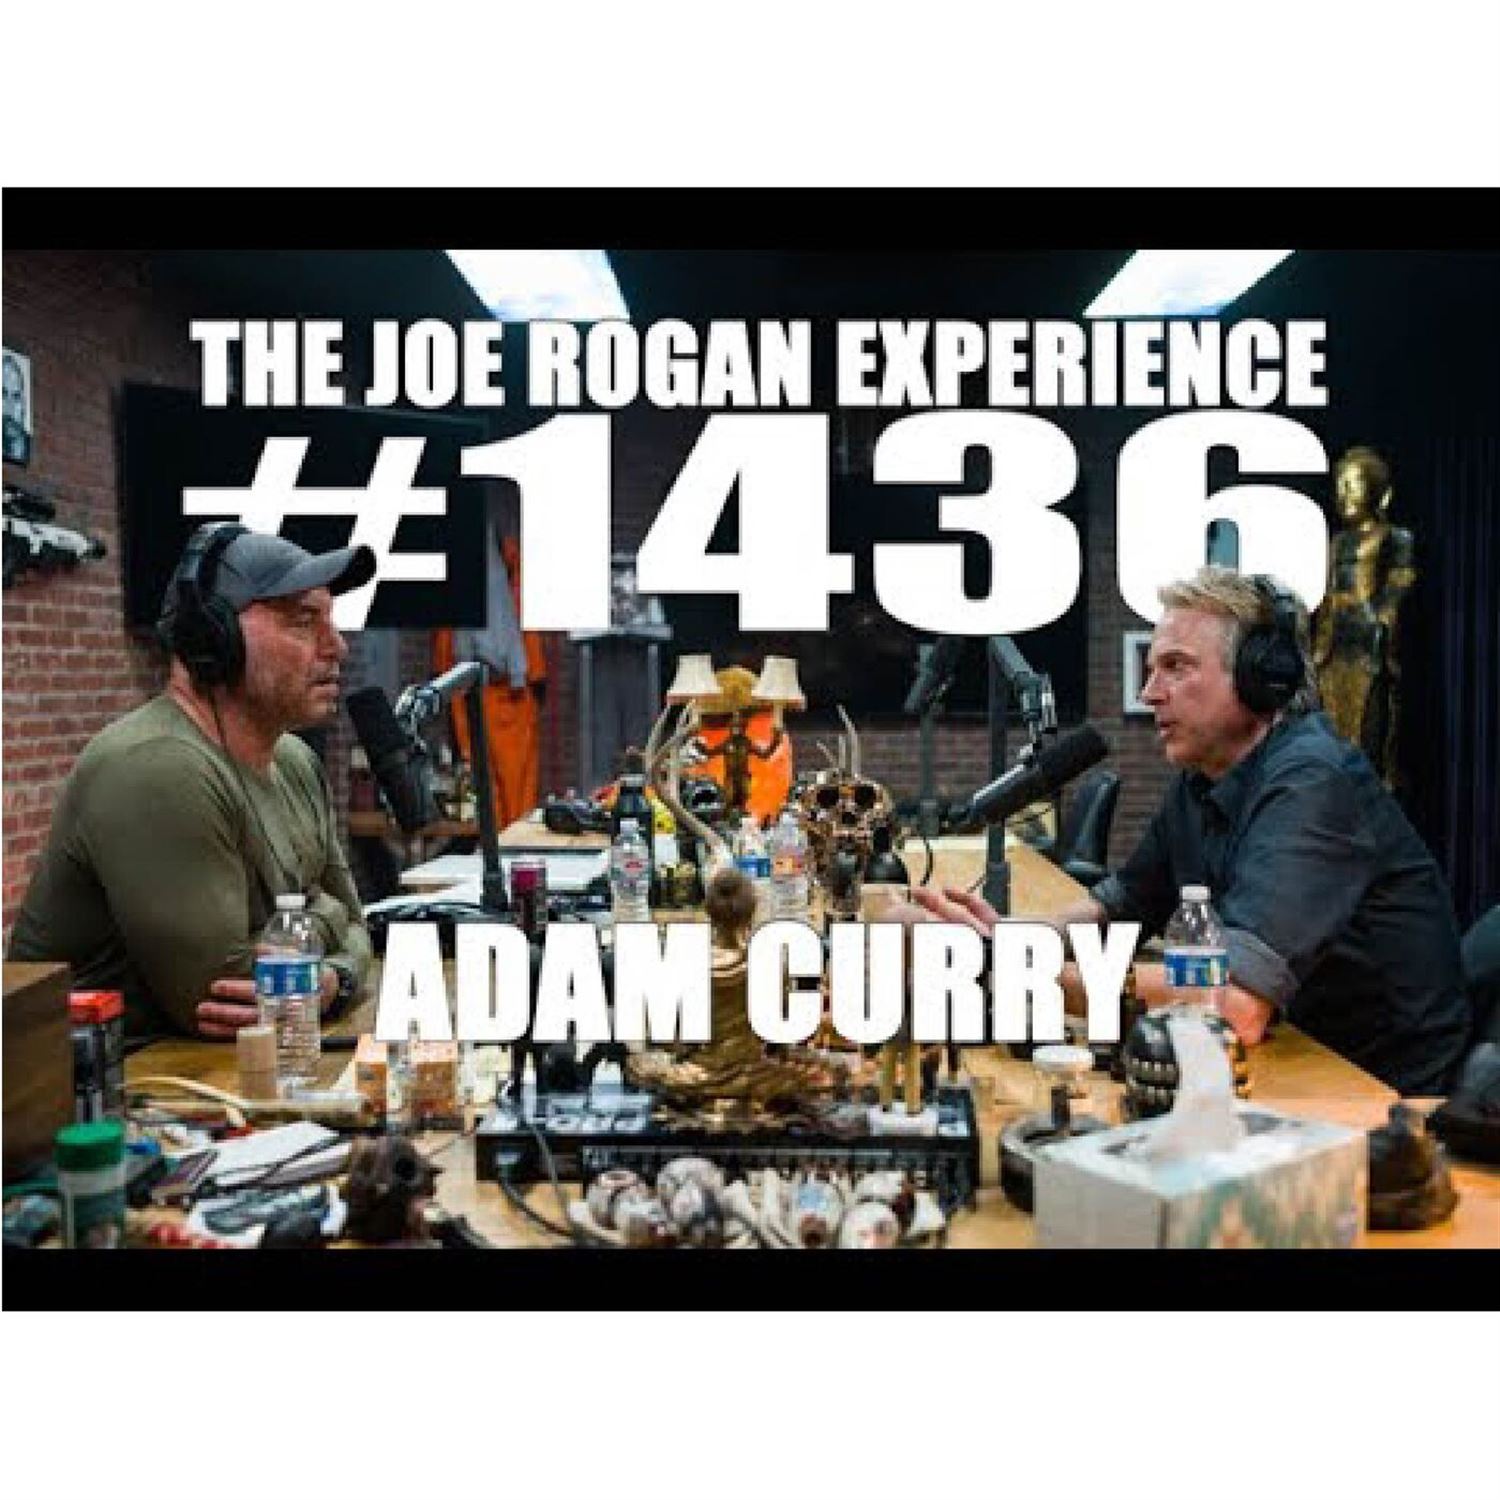 My introduction to Adam through JRE